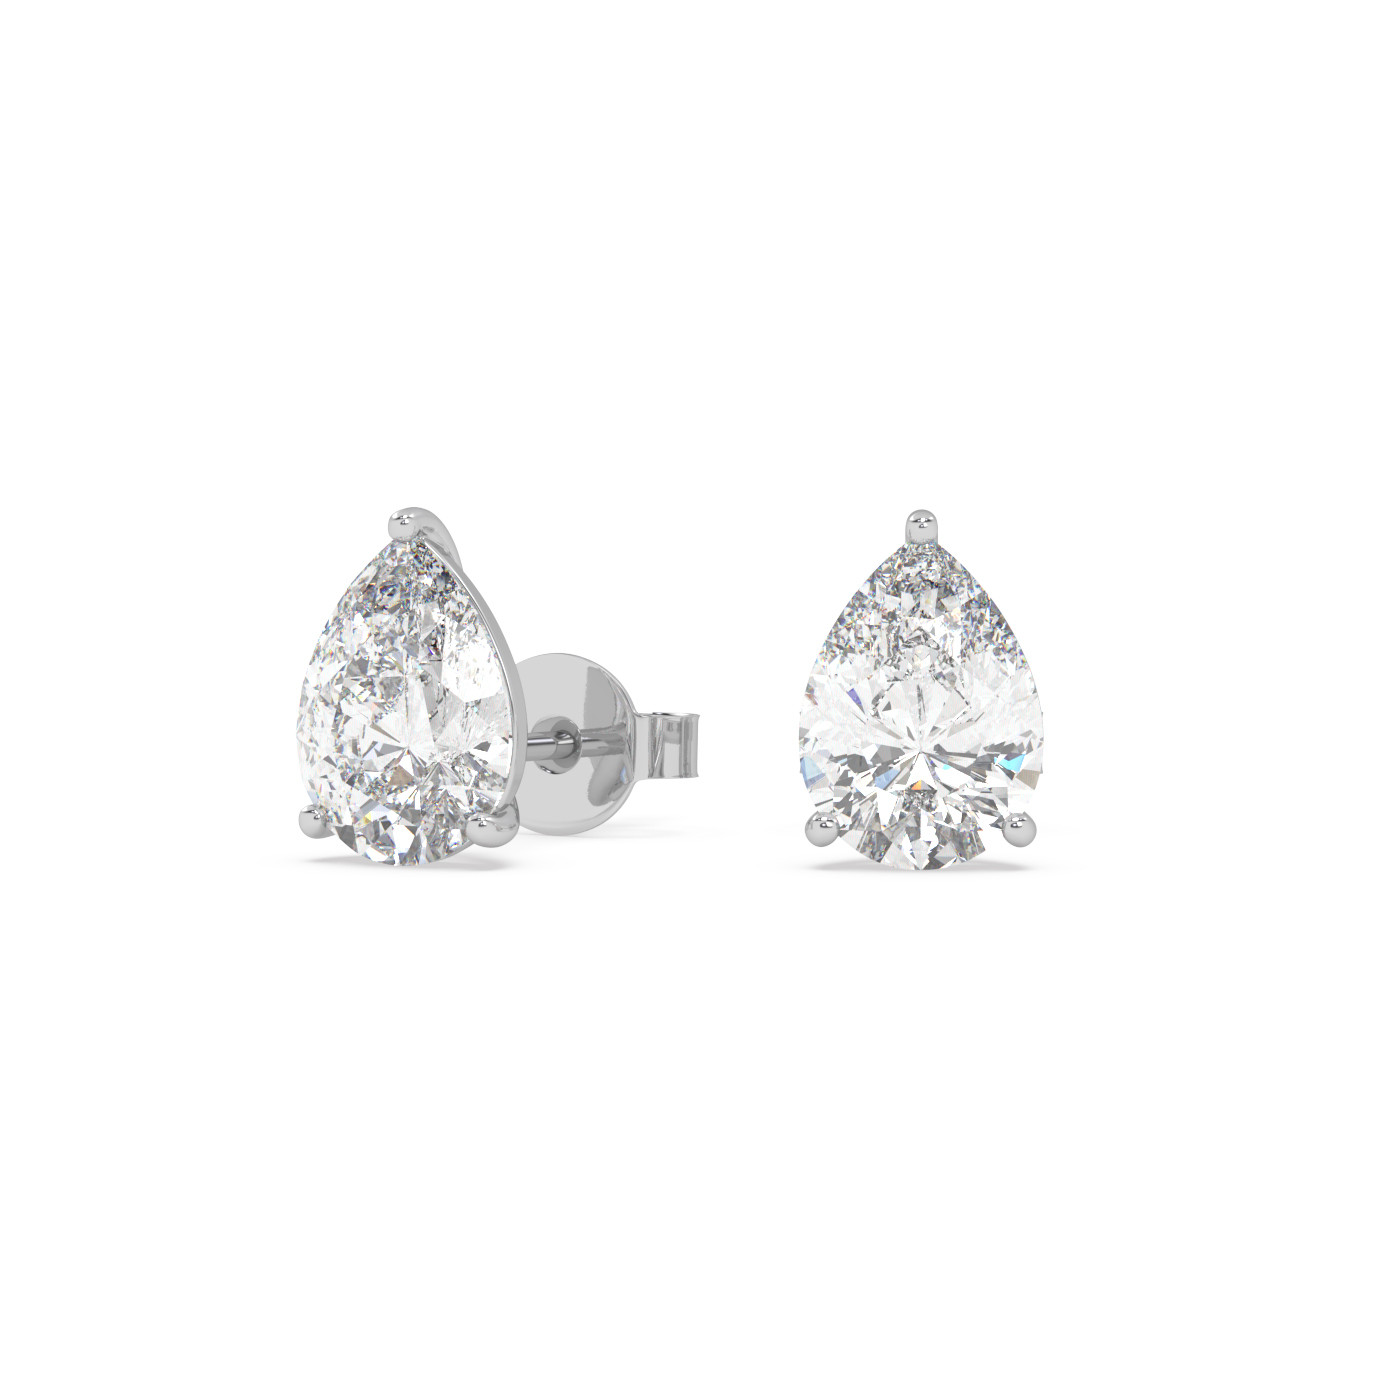 18k white gold 3.5 carat pear stud earrings with butterfly back Photos & images